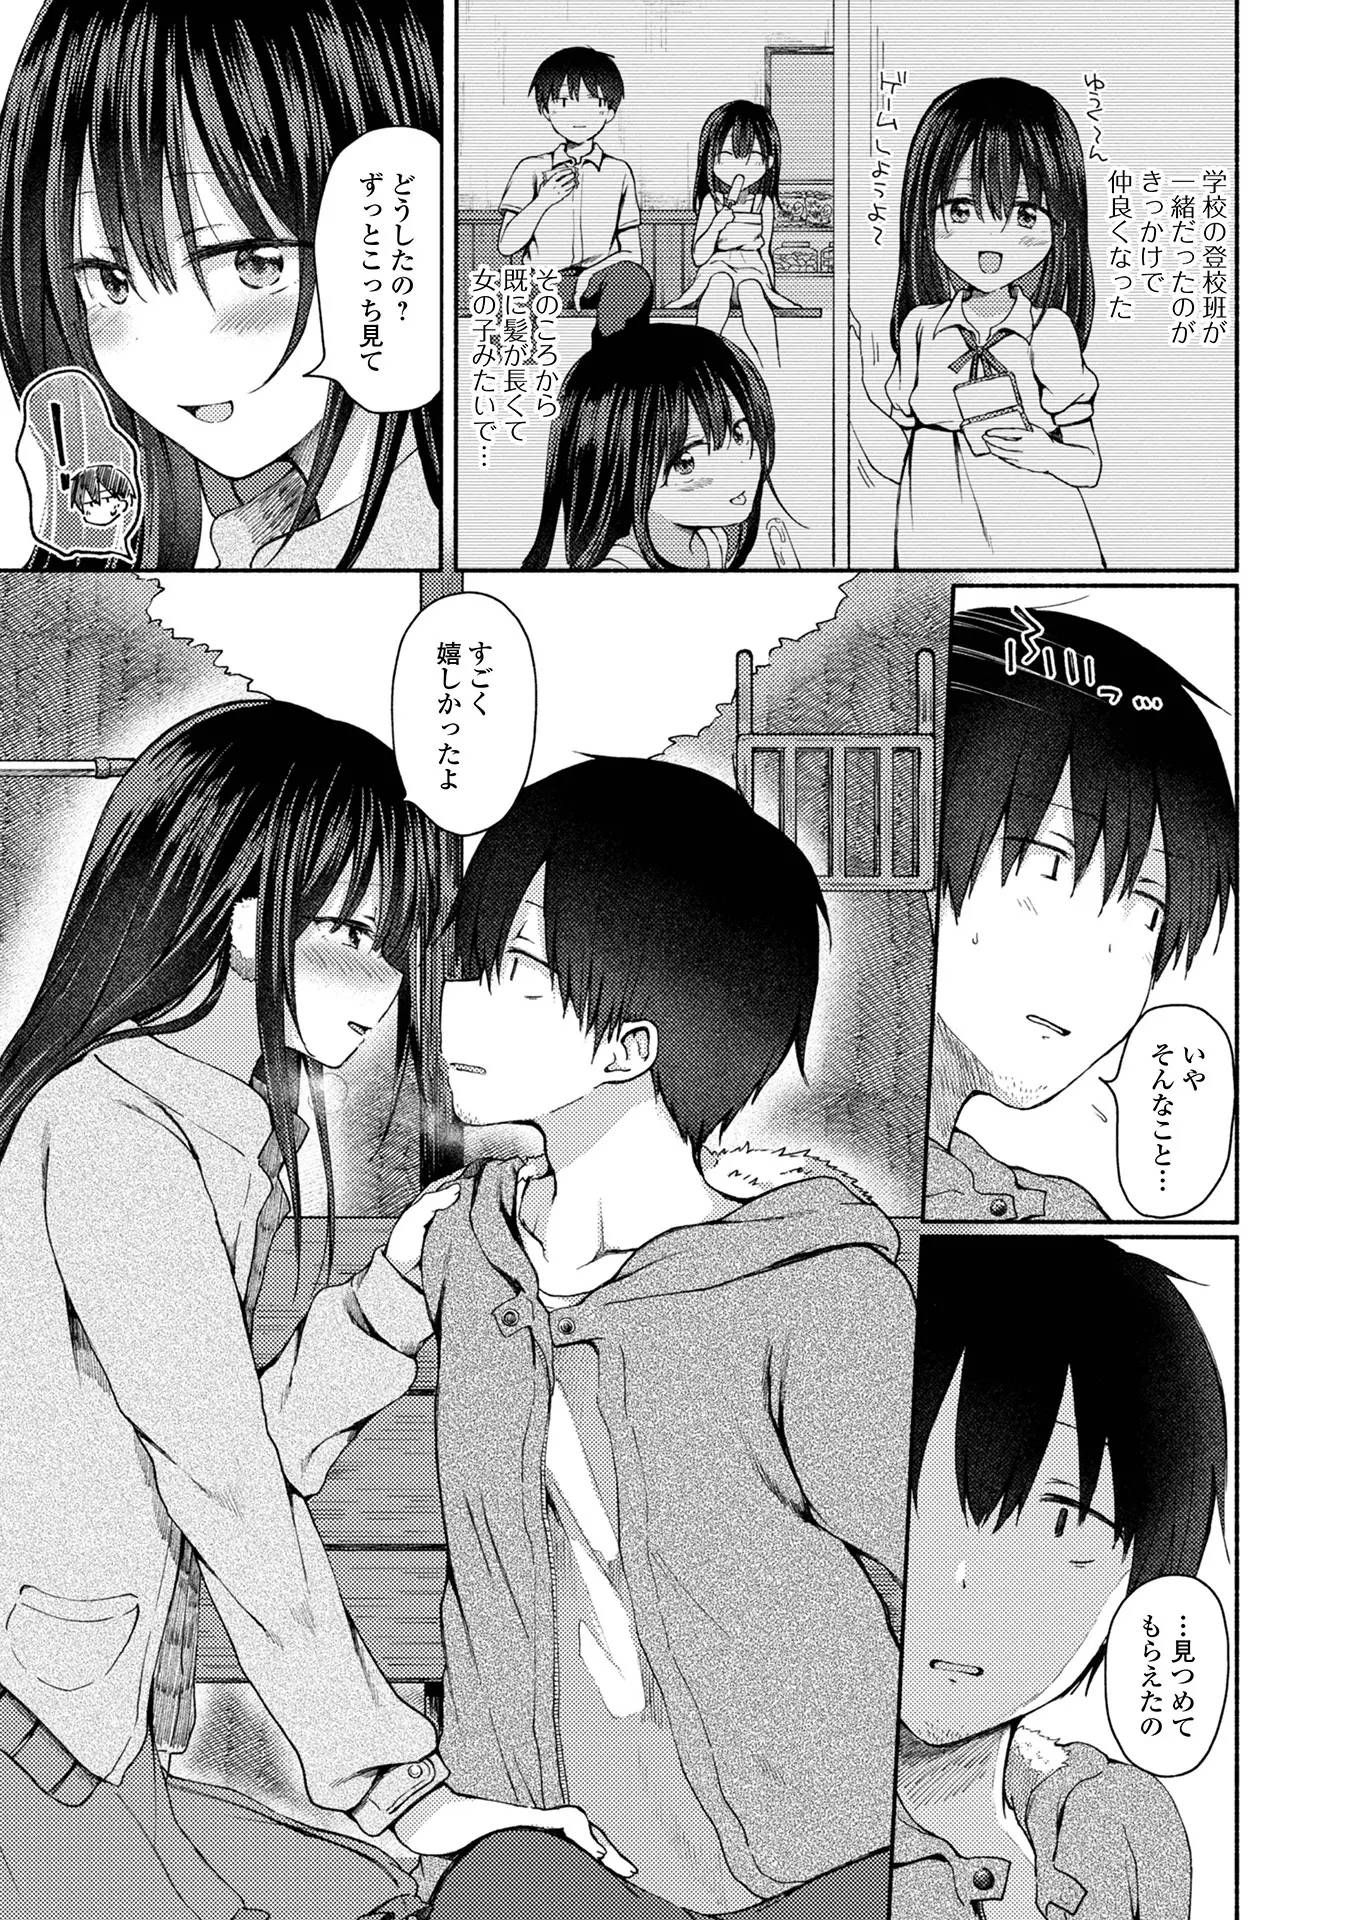 【Image】 Mr. Mann who saw the face of his childhood friend for the first time in a long time, becomes a female face www 3